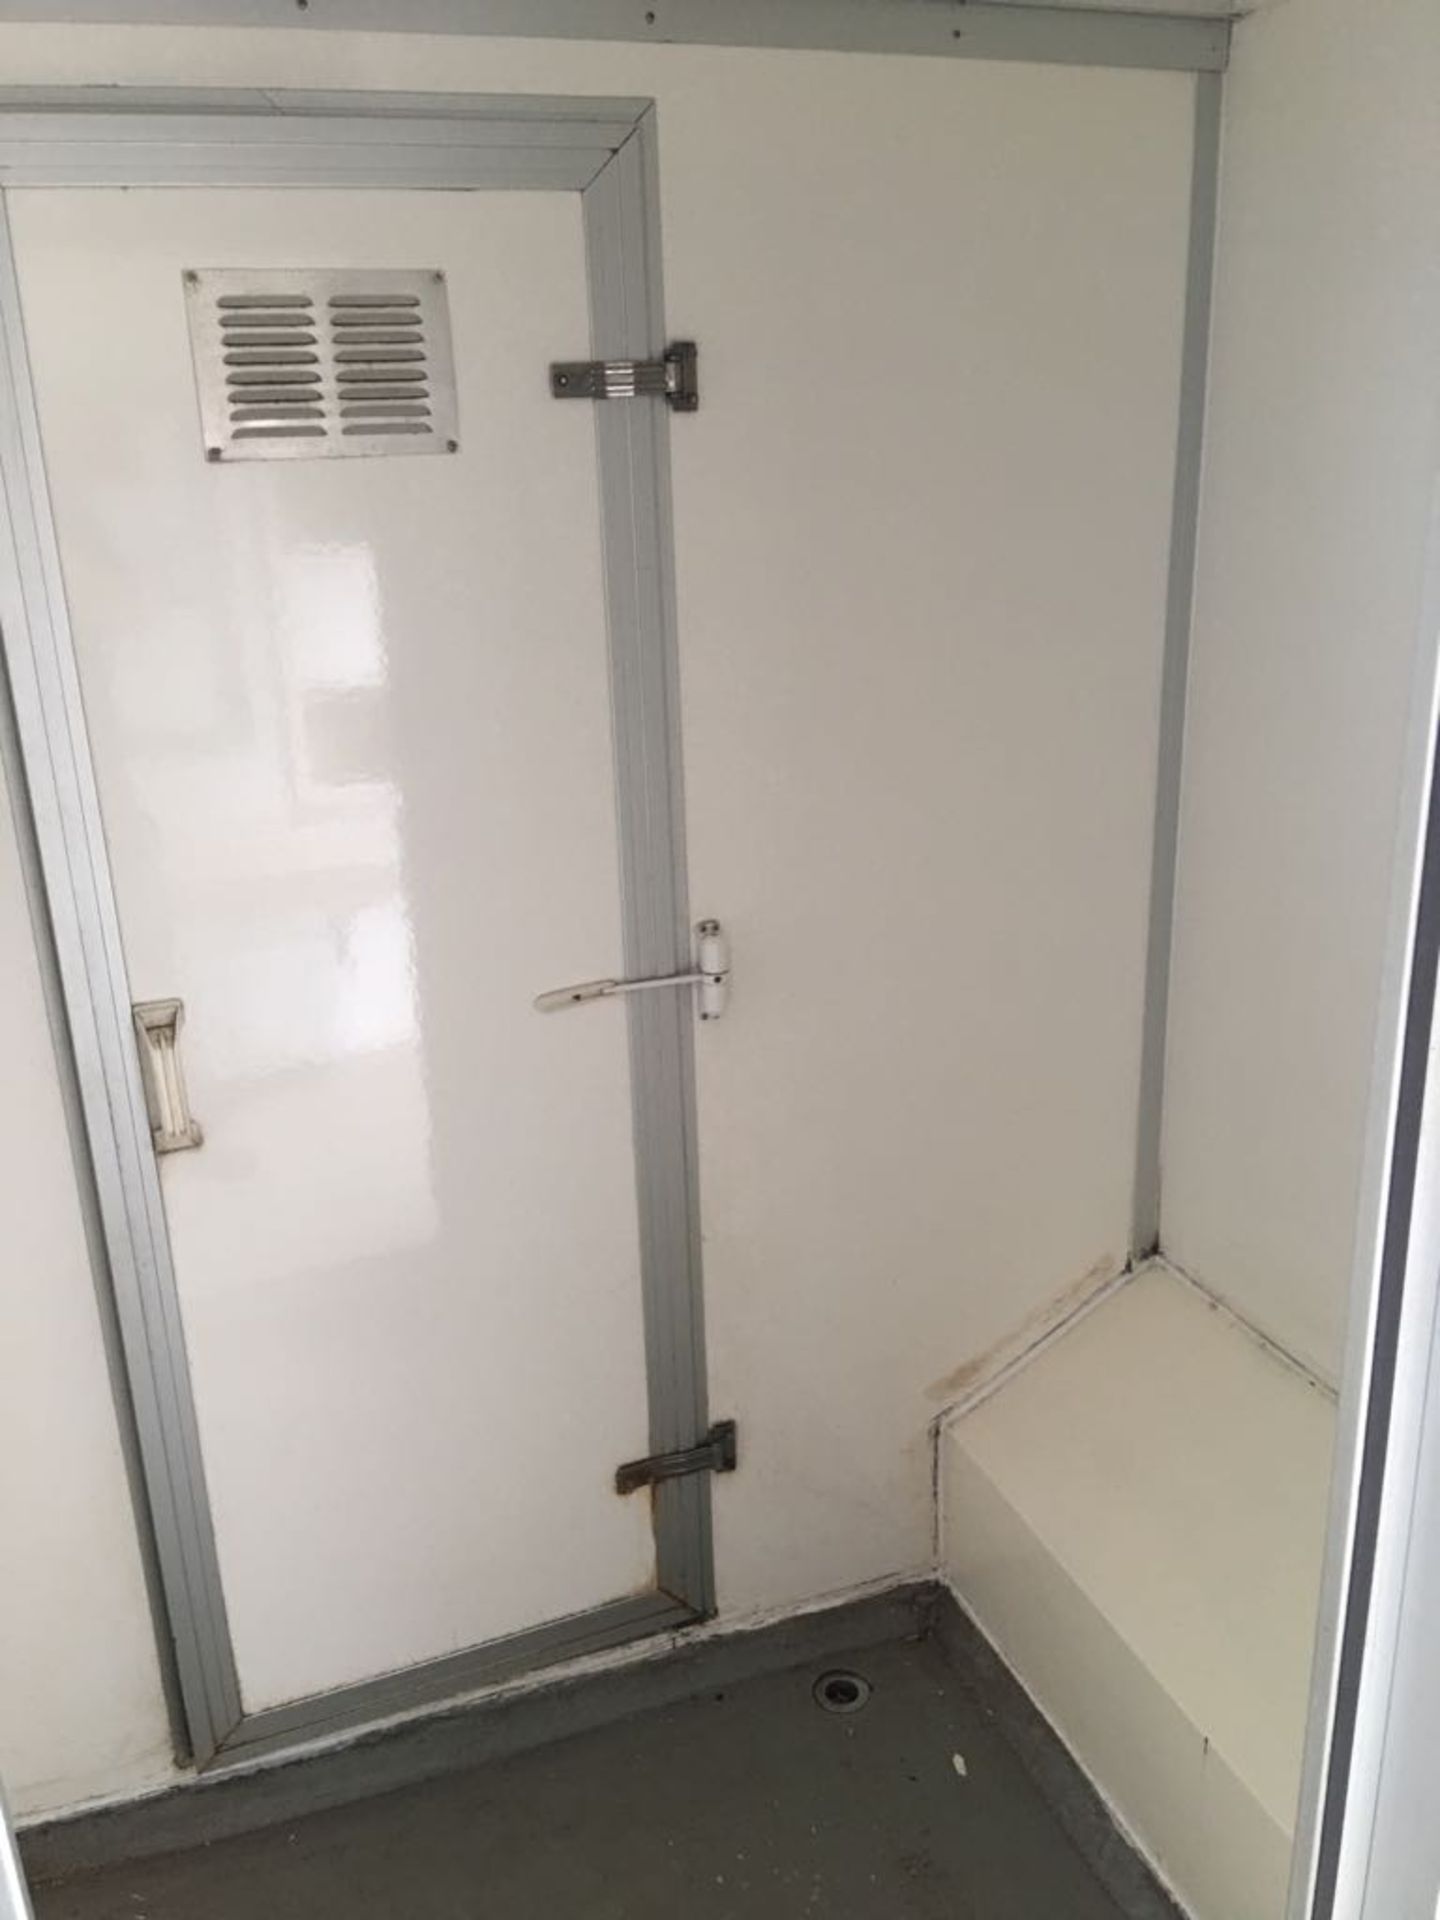 MOBILE TRAILER AMS TWIN SHOWER DECONTAMINATION UNIT AND CHANGING ROOMS - Image 9 of 27